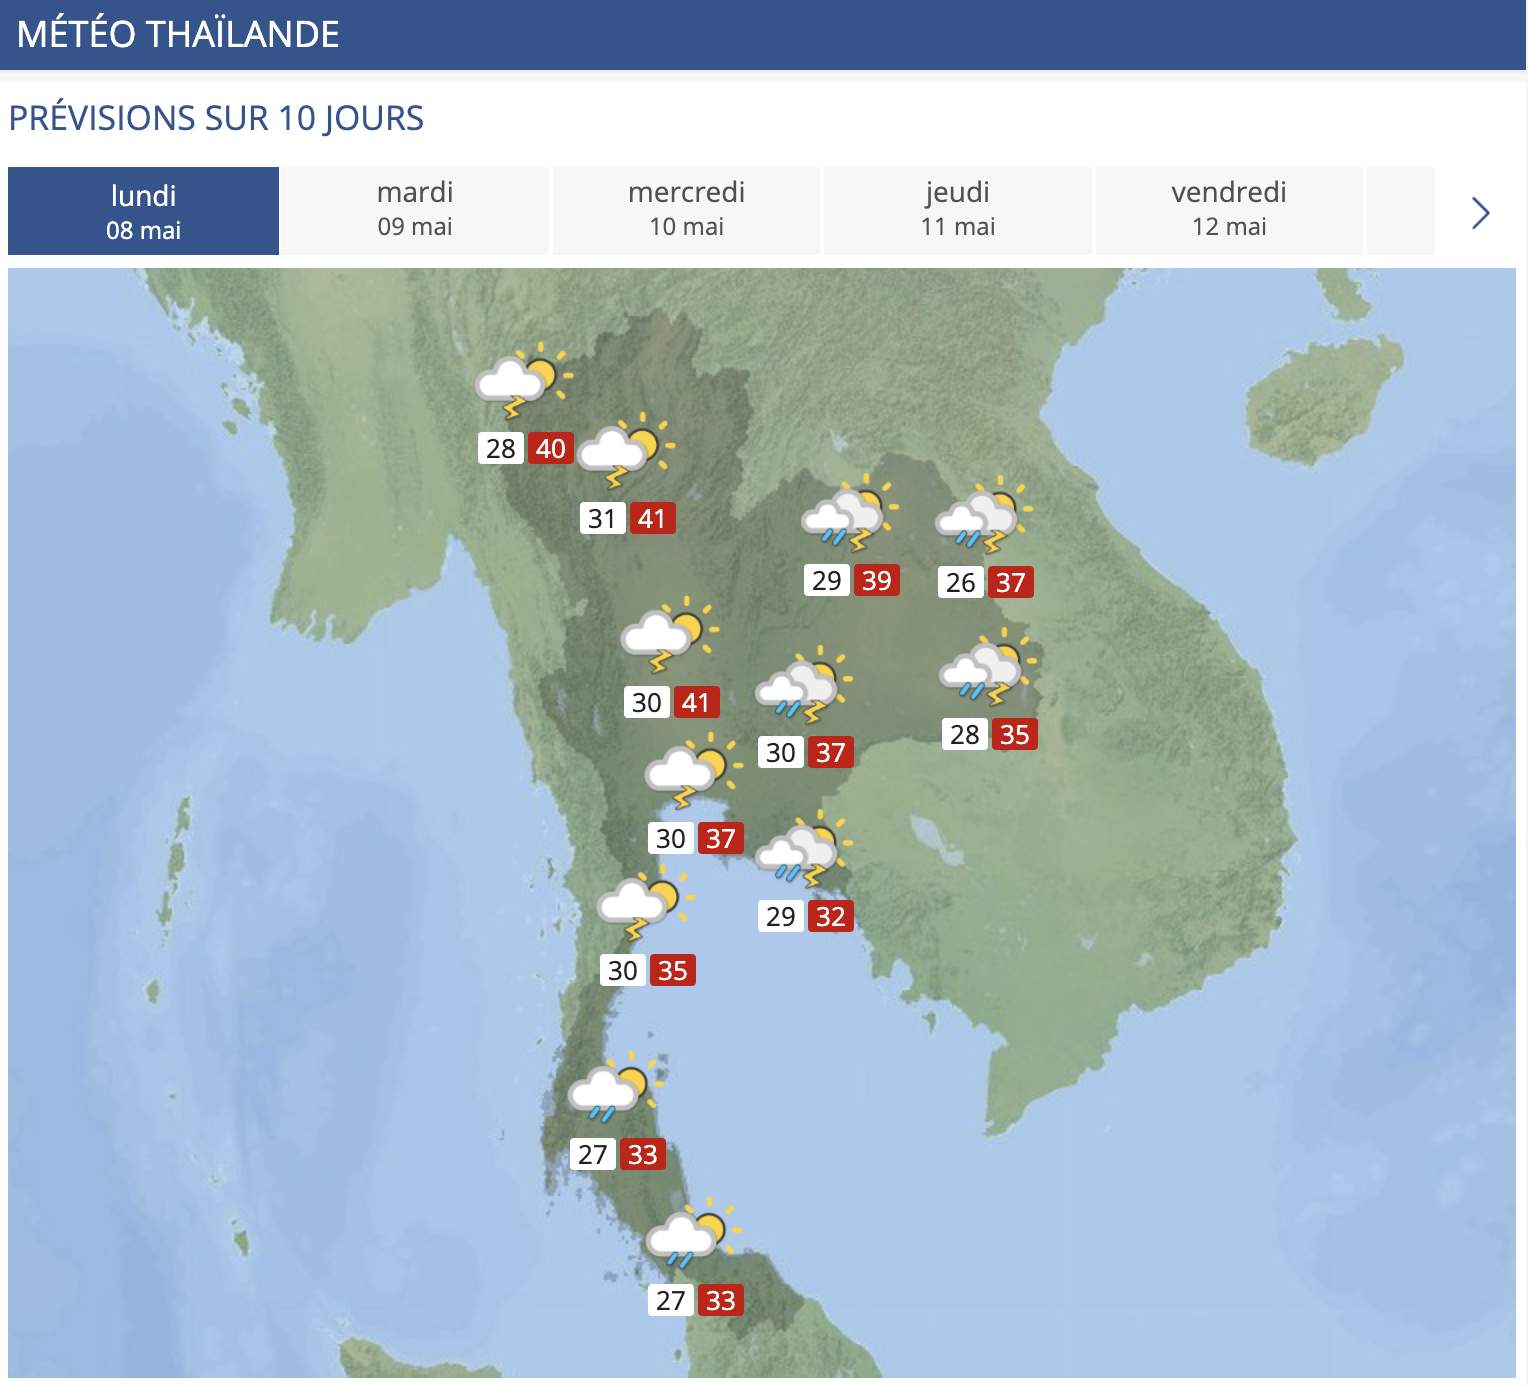 Monday's weather in Thailand; Source: MeteoNews